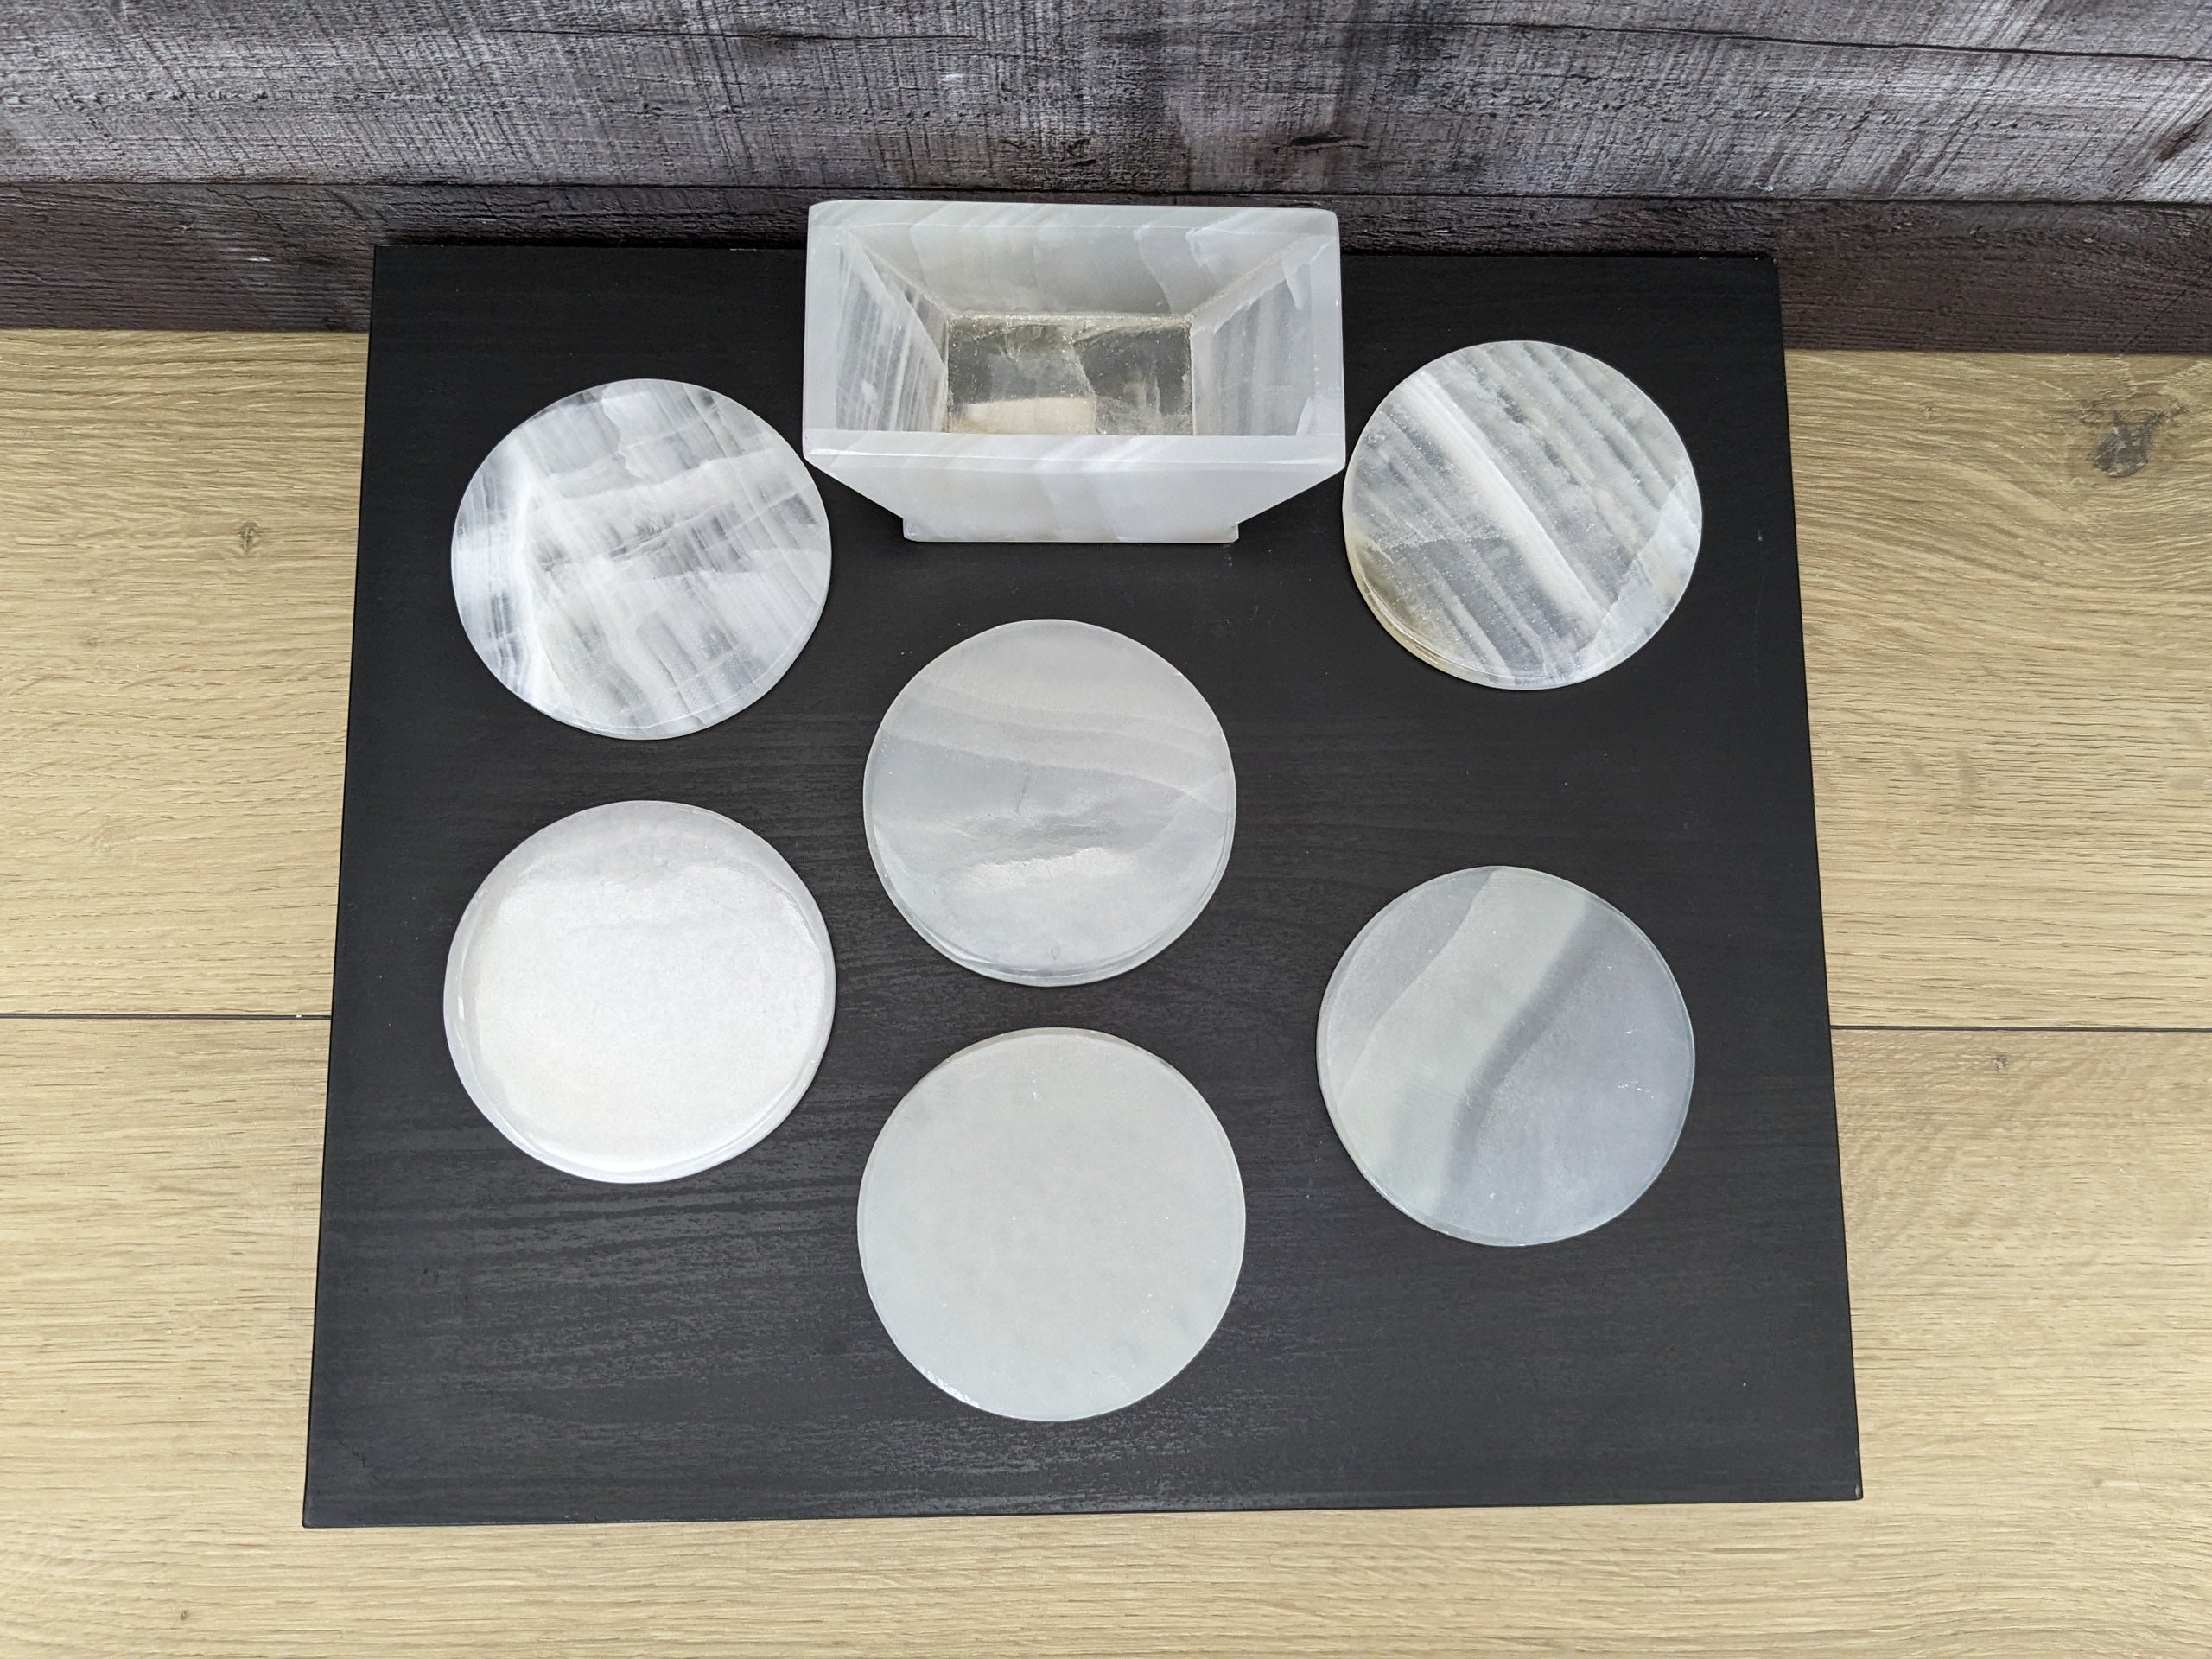 White Onyx Coaster Set of Six with Holder. The coasters are round. Handmade in Mexico. Ships from the USA. Buy now at www.felipeandgrace.com.